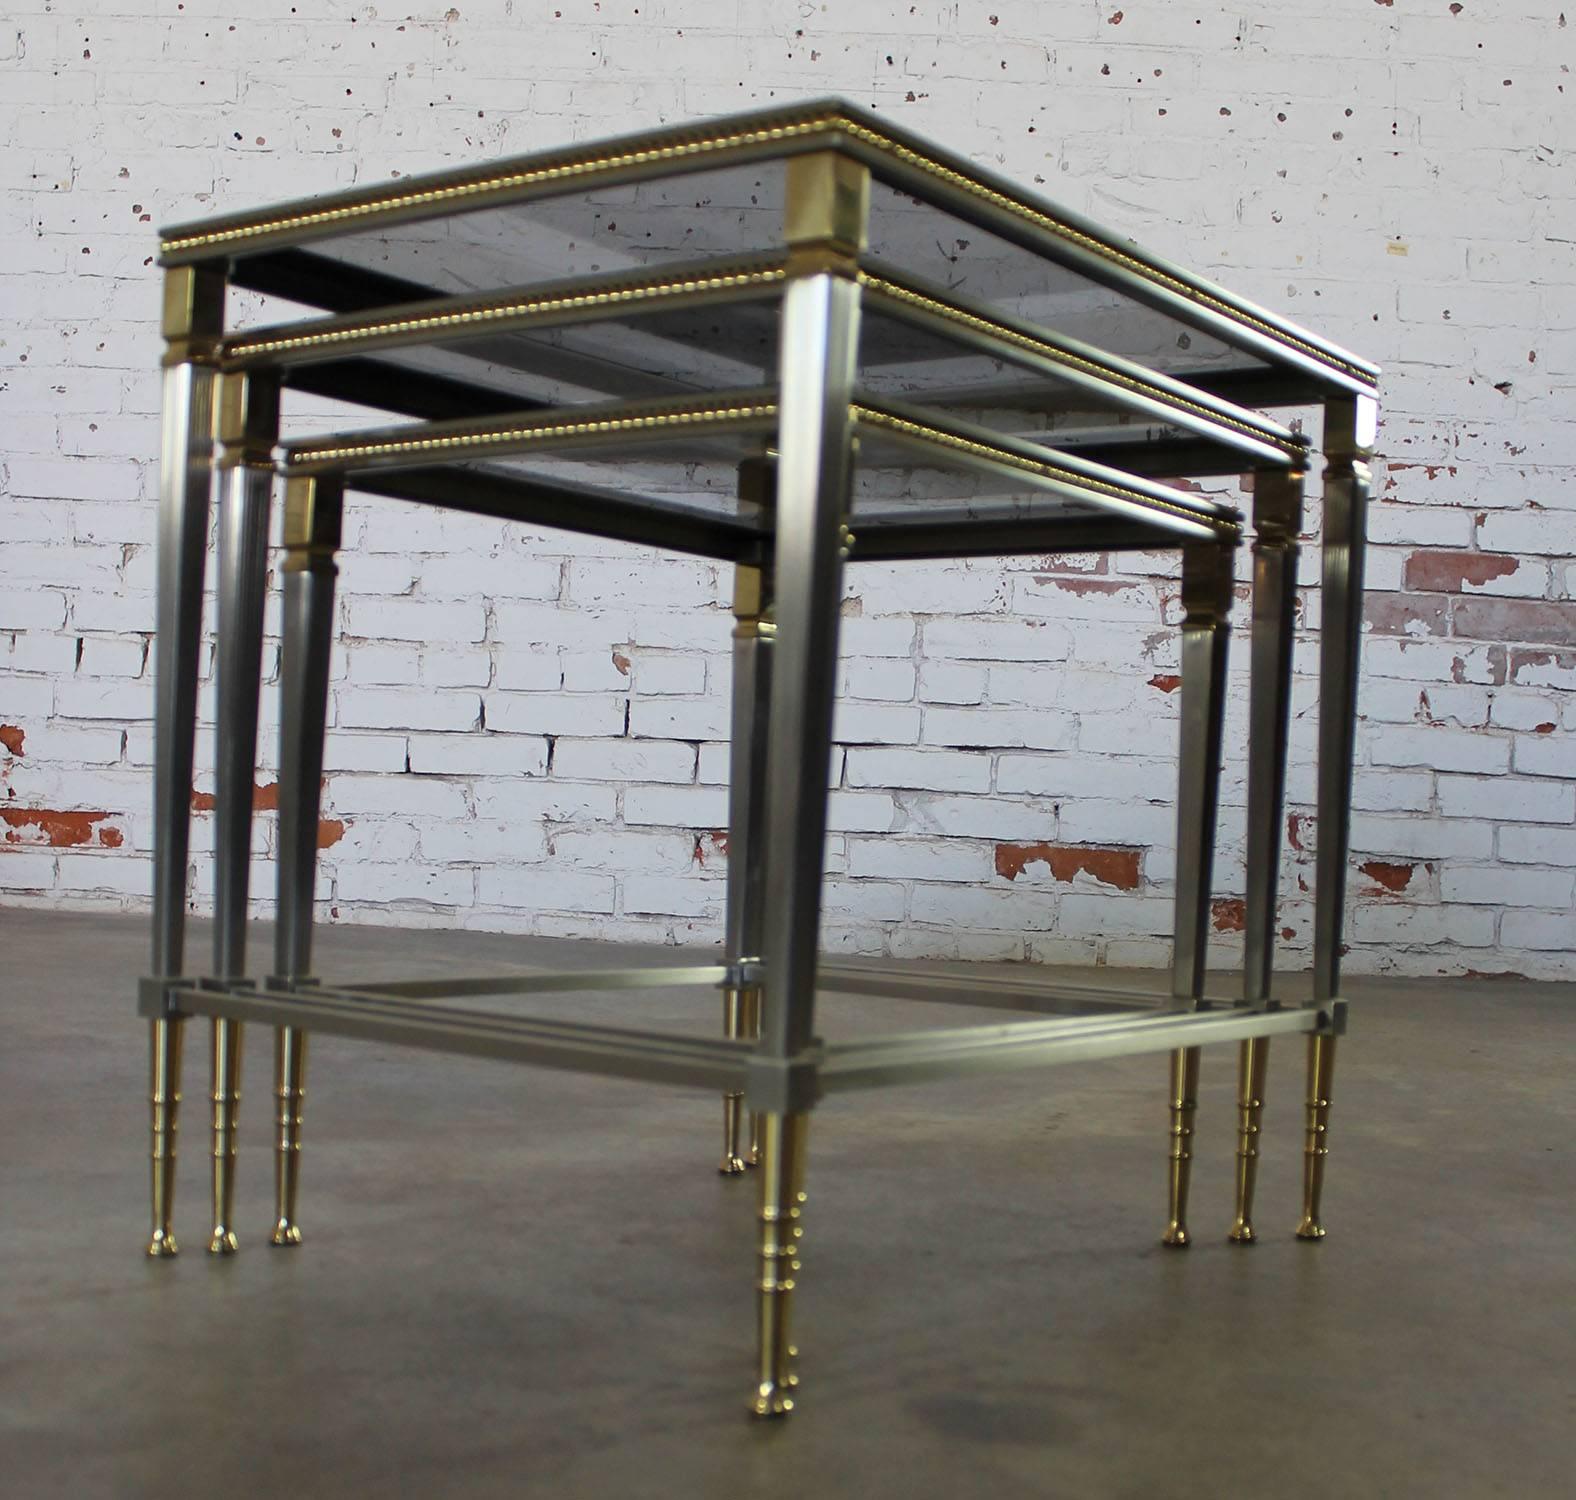 Contemporary Brass and Stainless Nesting Tables with Mirror Edged Glass Tops